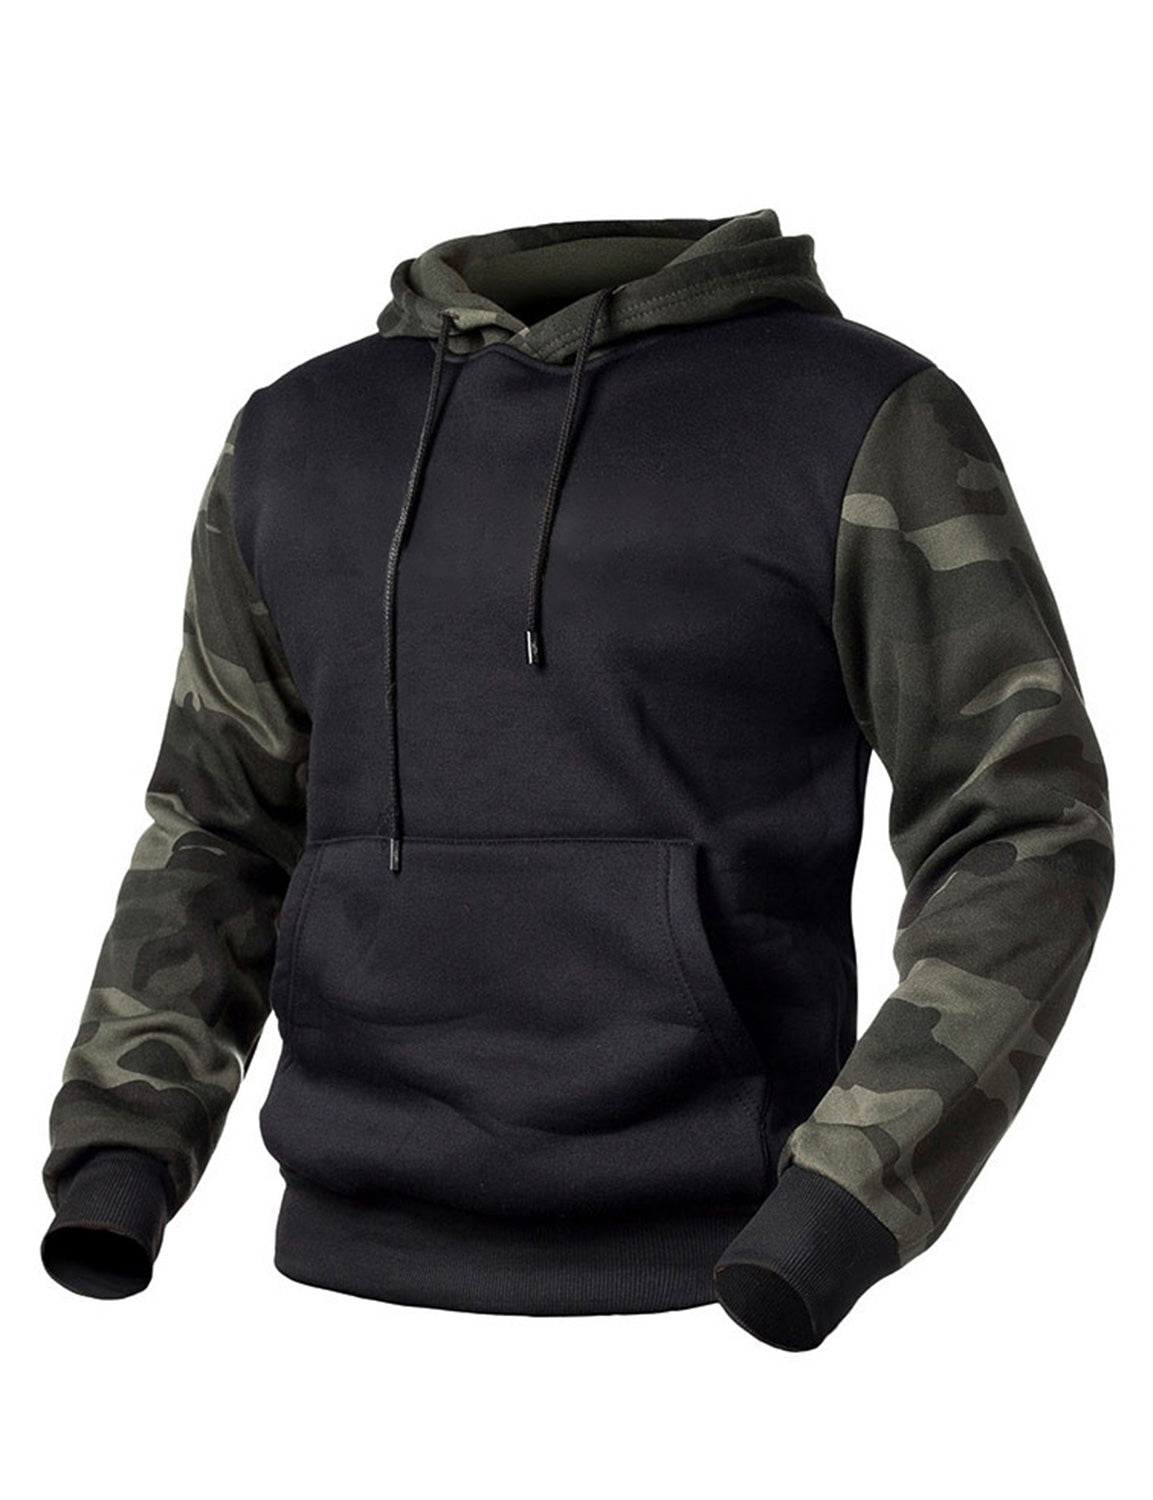 Men's Camo Solid Long Sleeve Casual Pullover Hoodie Fall Winter Sweatshirts